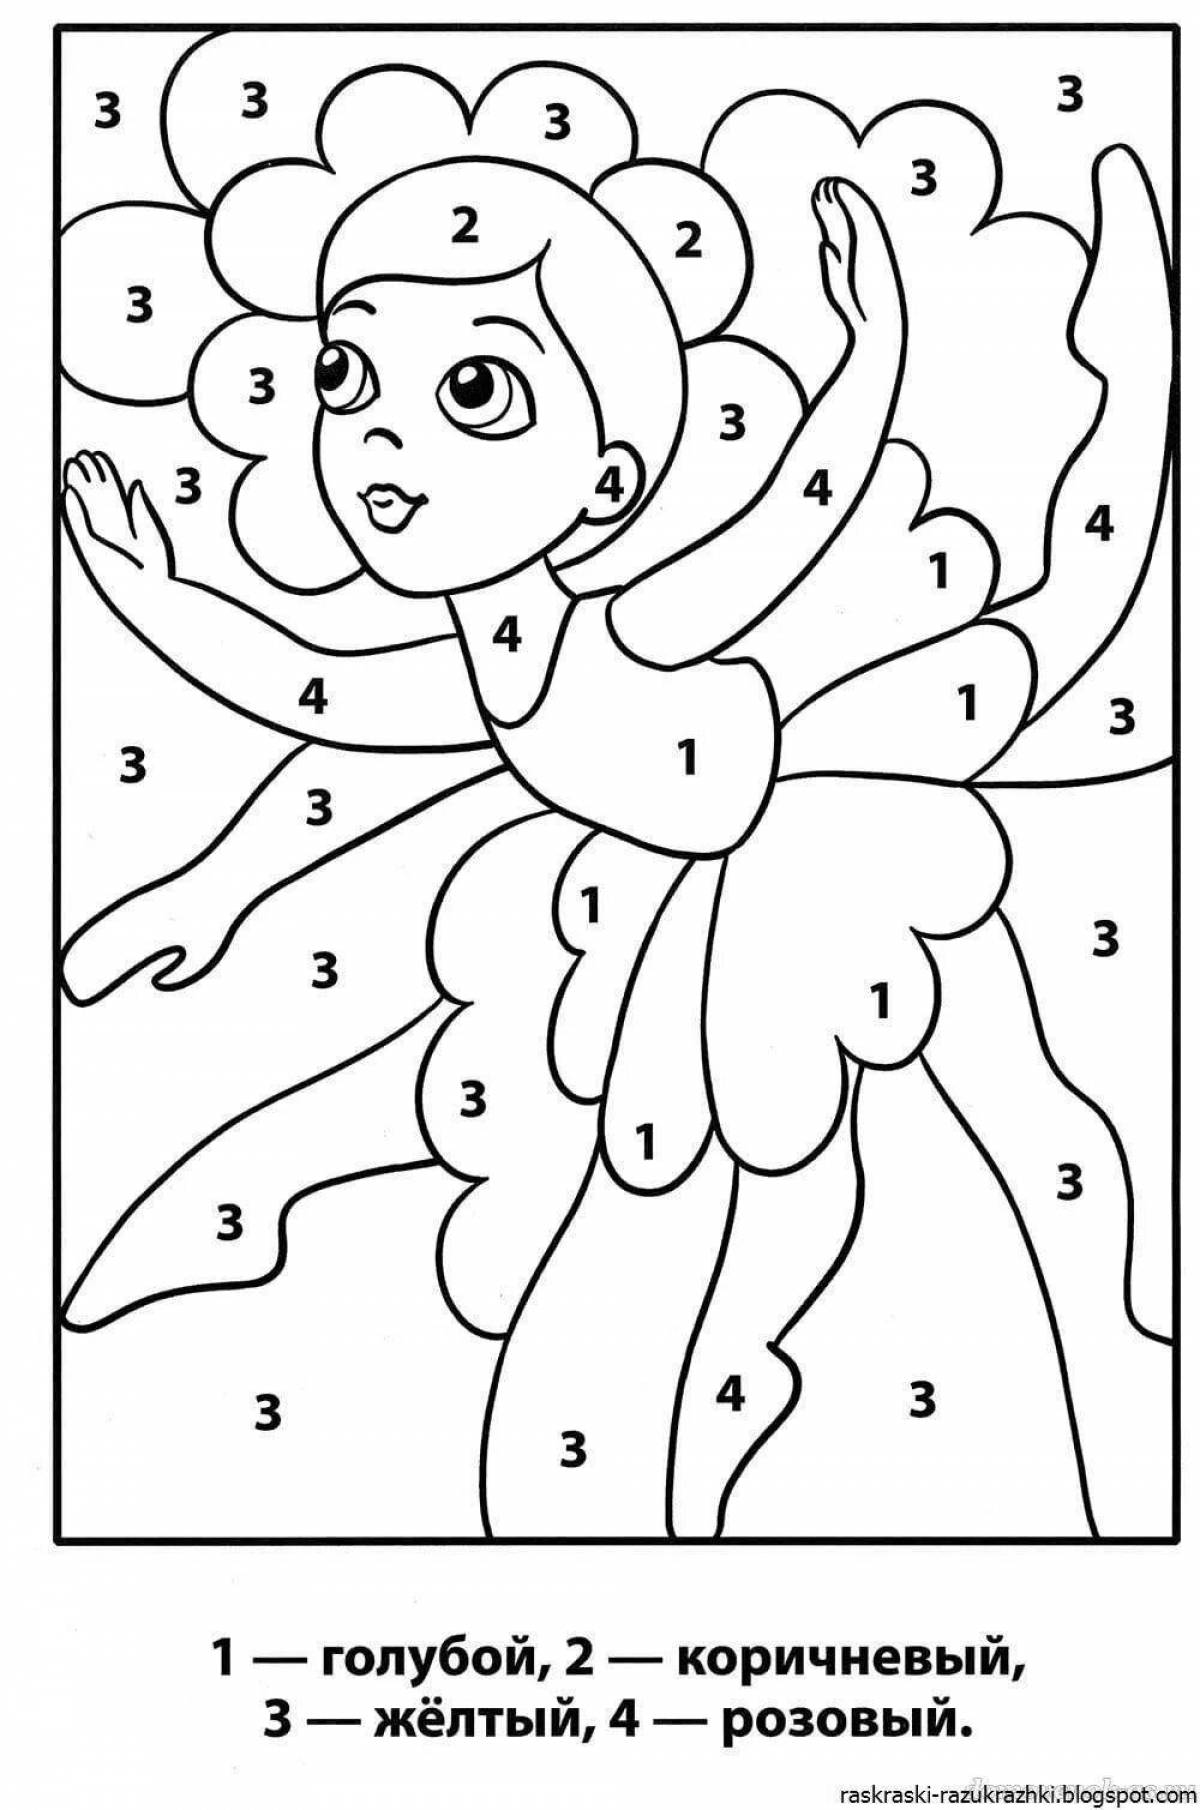 Fairytale coloring game for girls 6-7 years old